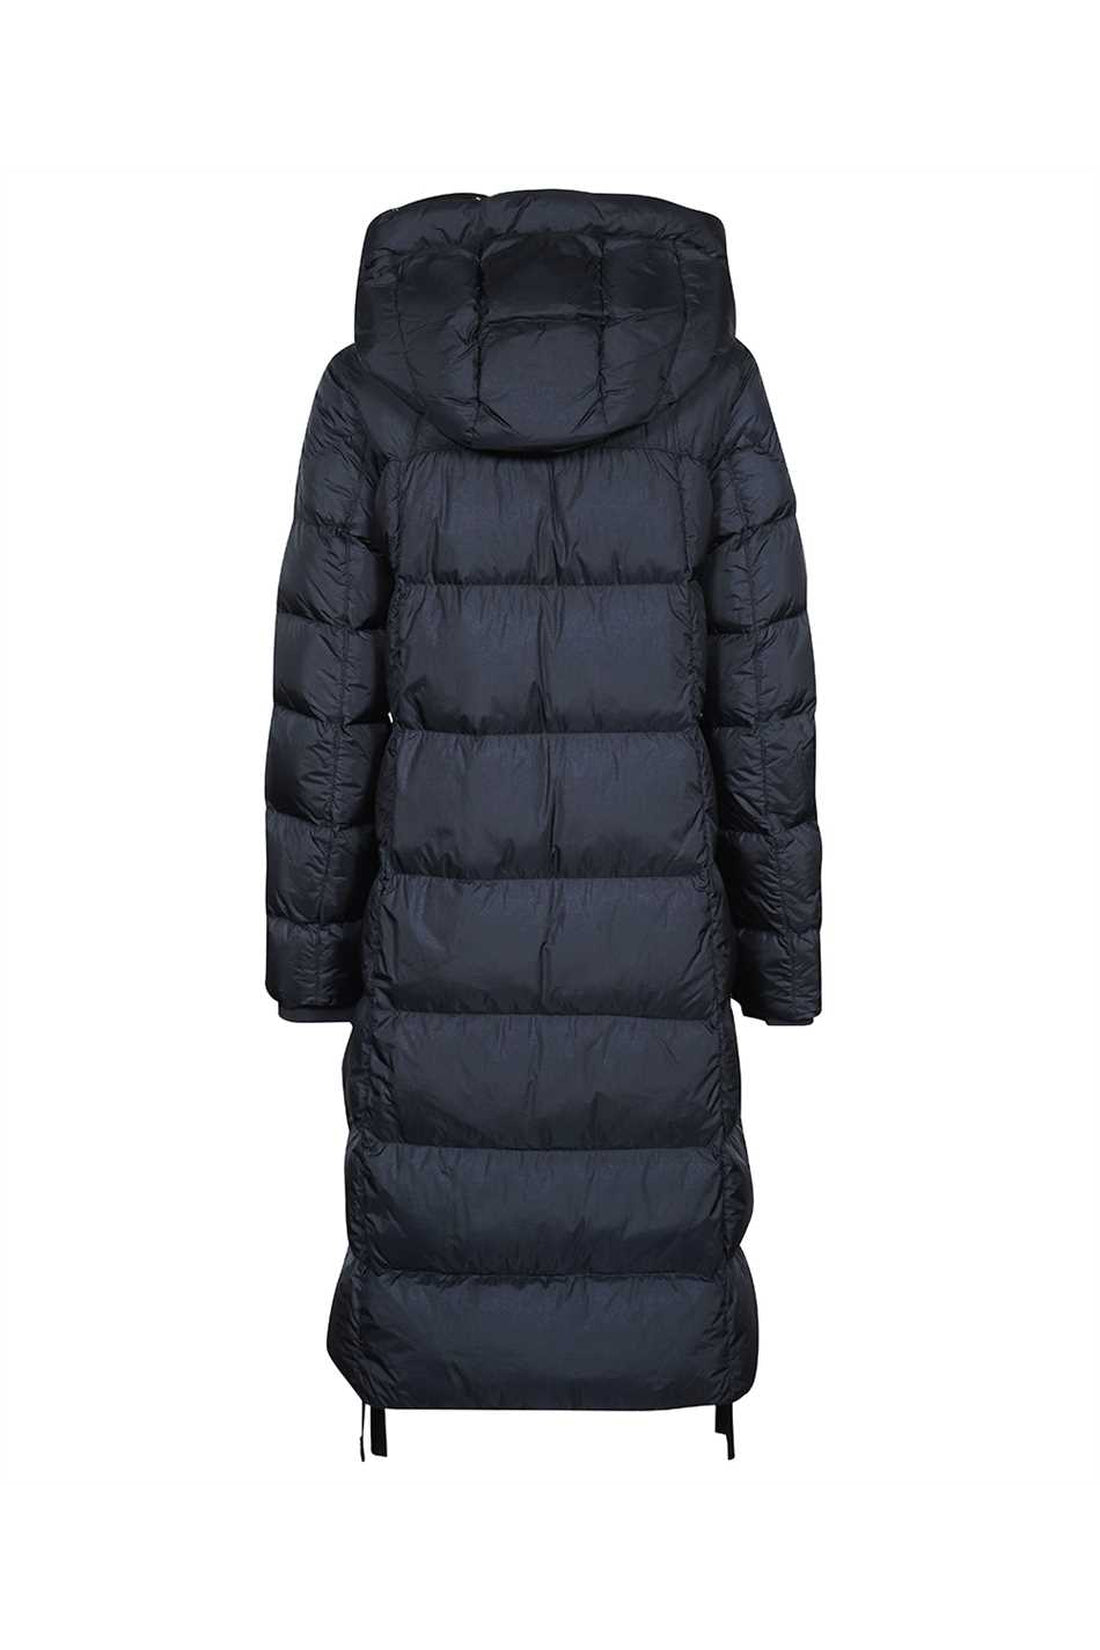 Parajumpers-OUTLET-SALE-Panda long hooded down jacket-ARCHIVIST